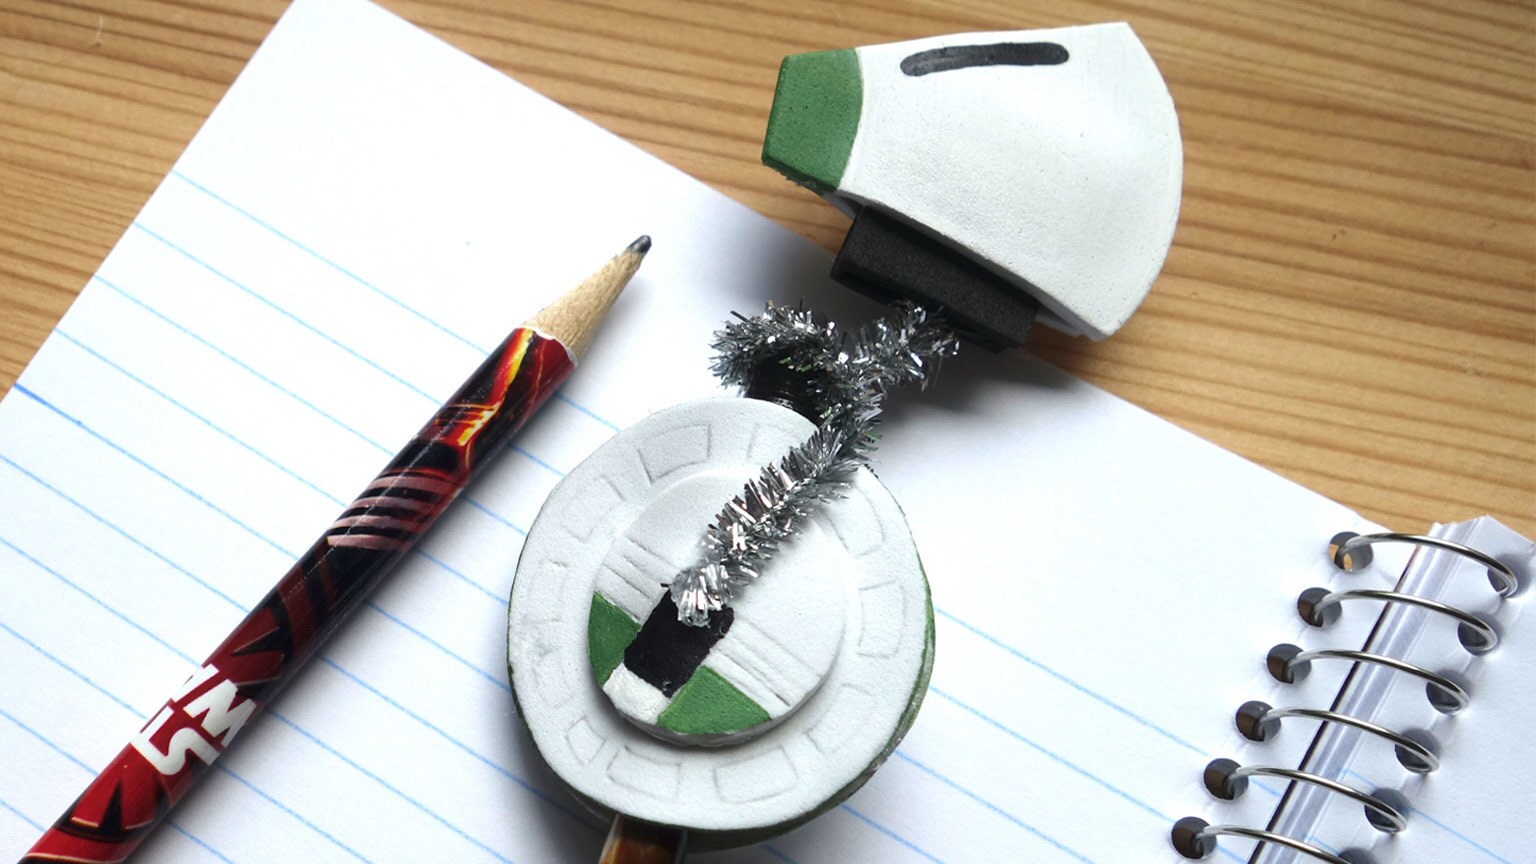 Craft This D-O Pencil Topper for Your Writing and Art Adventures